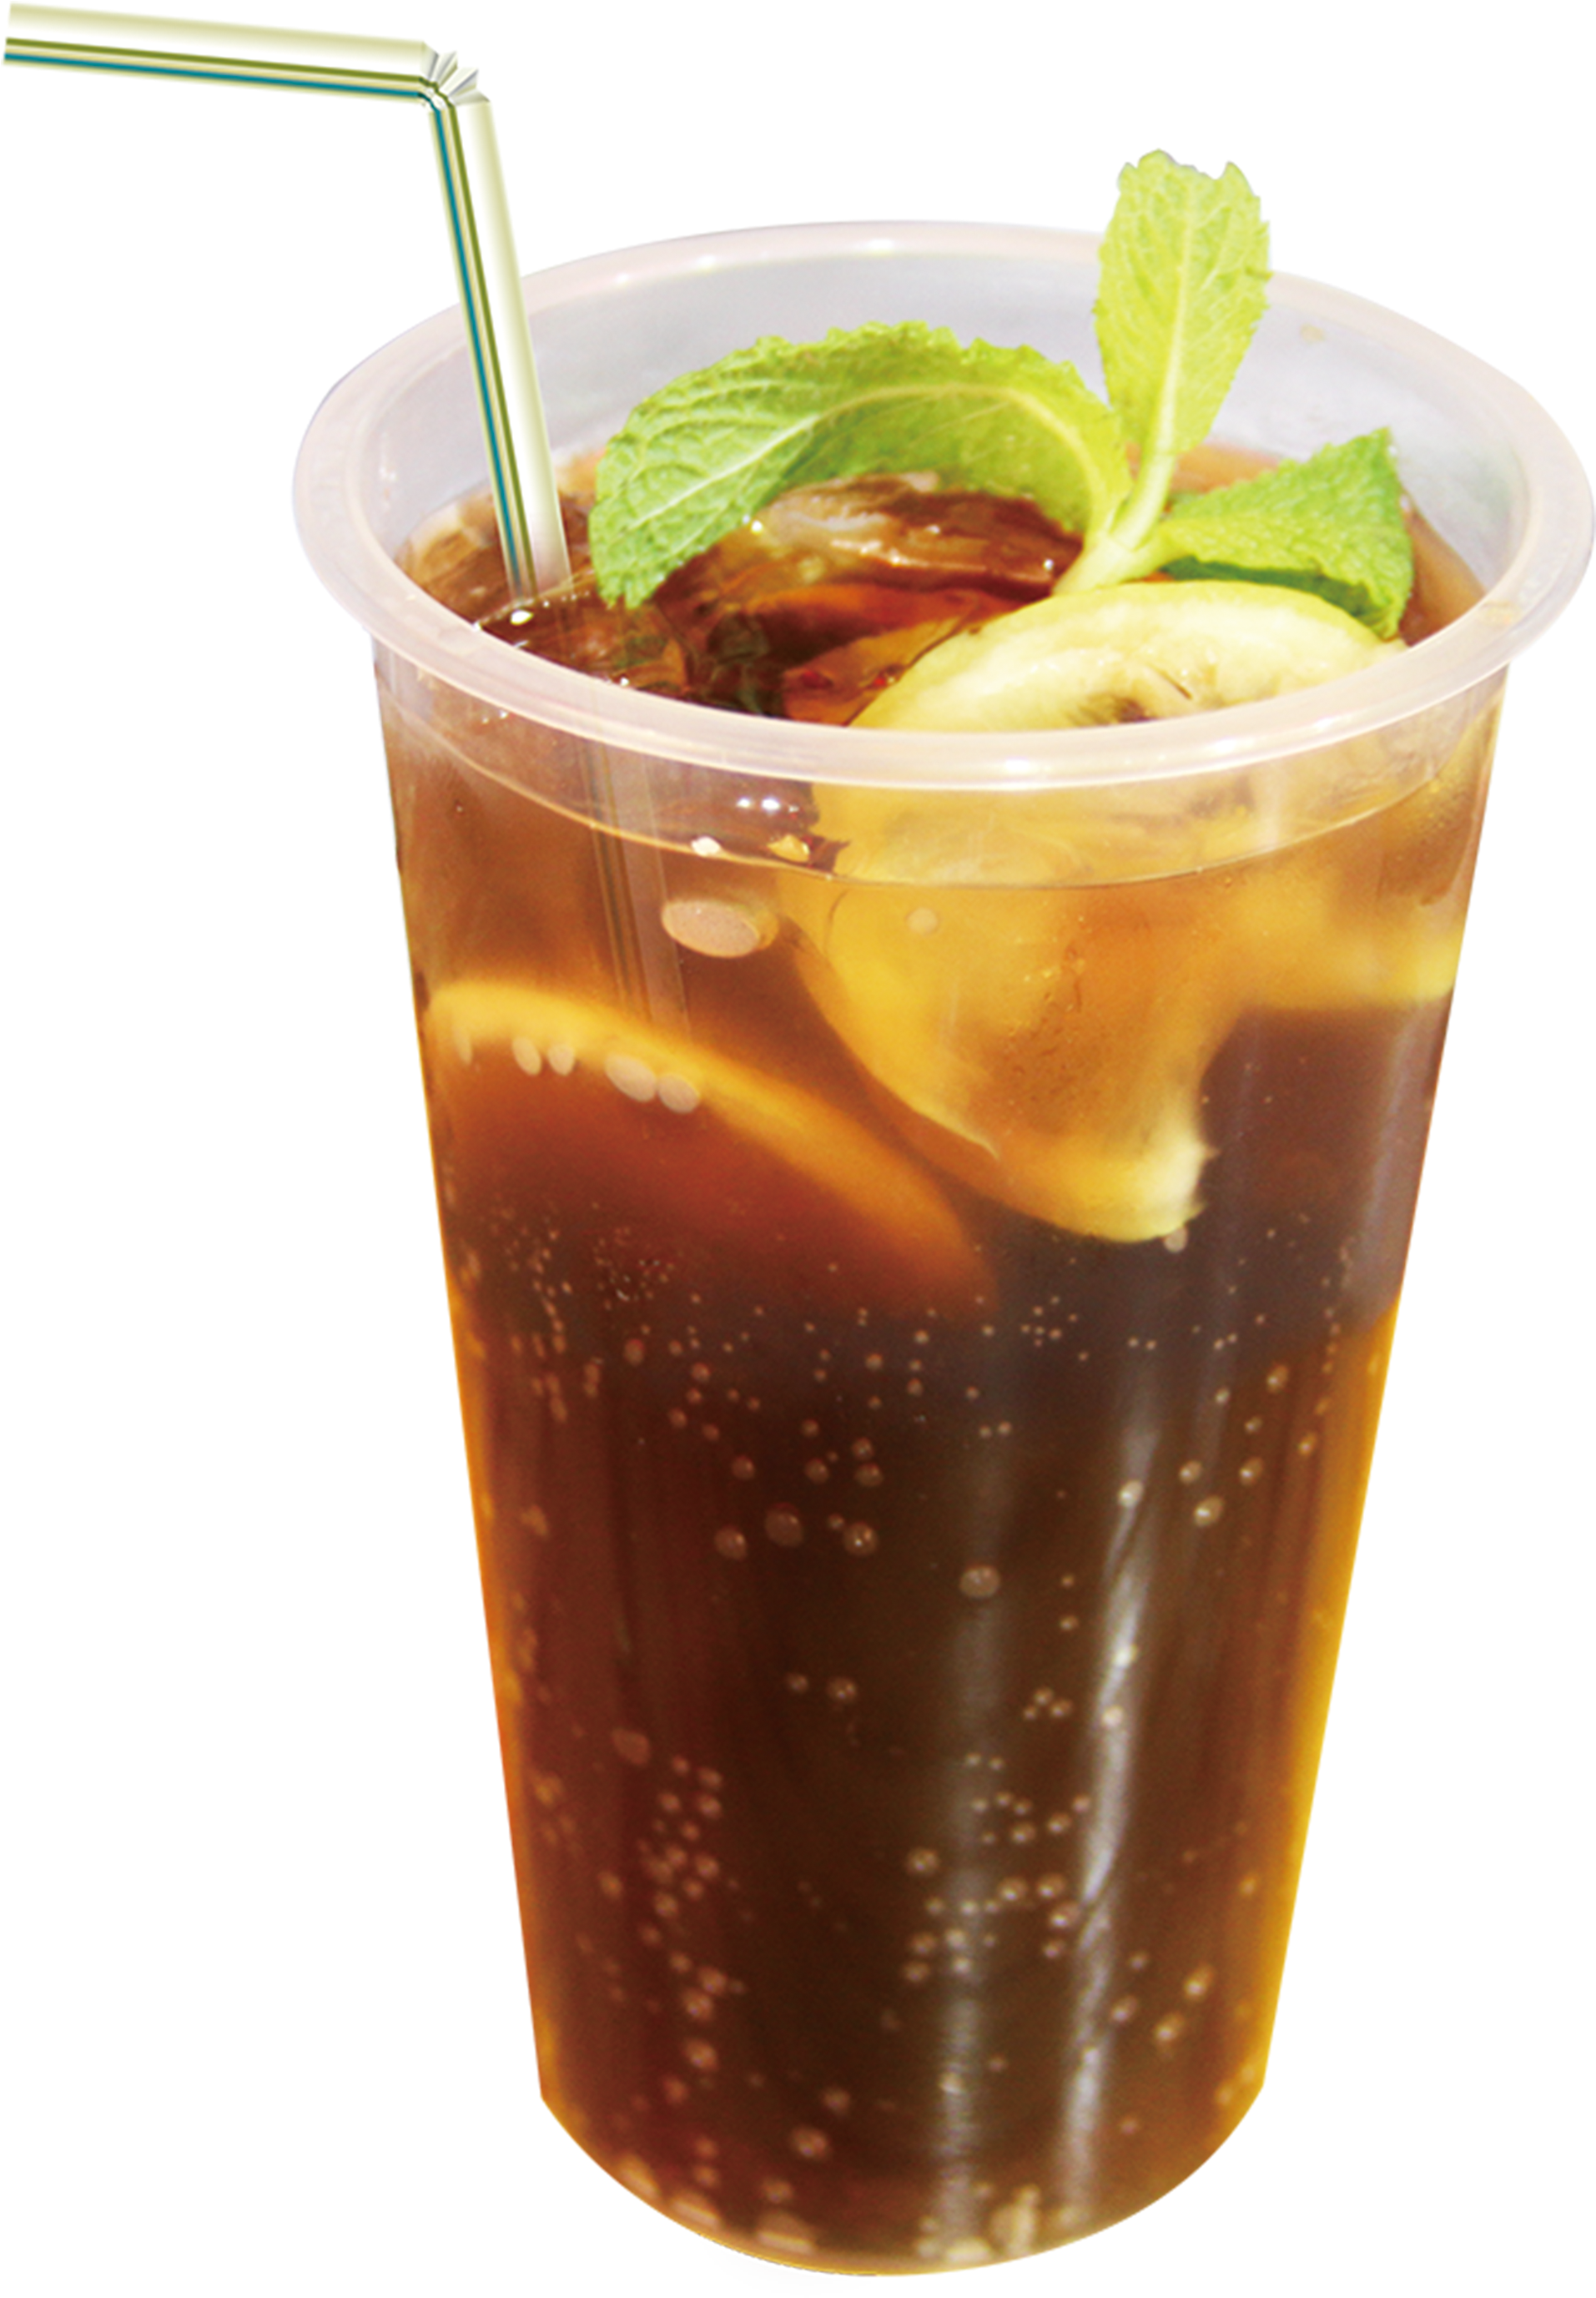 Juice Rum And Coke Non-alcoholic Drink - Non-alcoholic Drink (3540x2760)